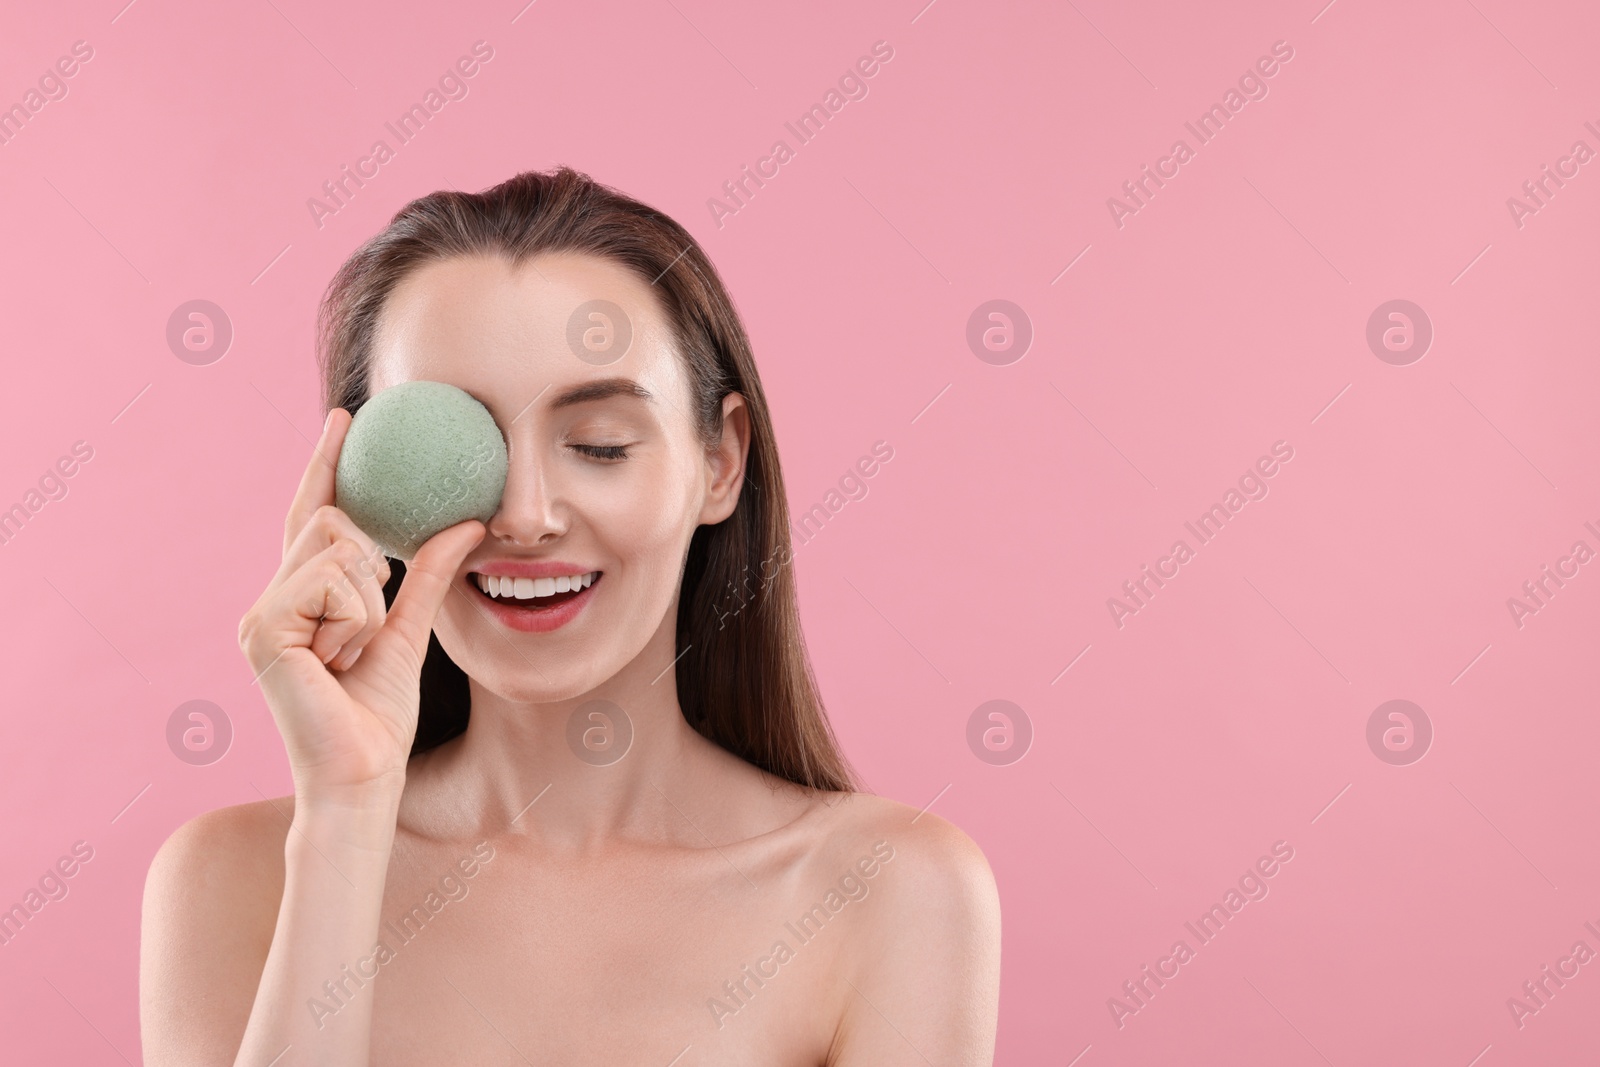 Photo of Happy young woman holding face sponge on pink background. Space for text